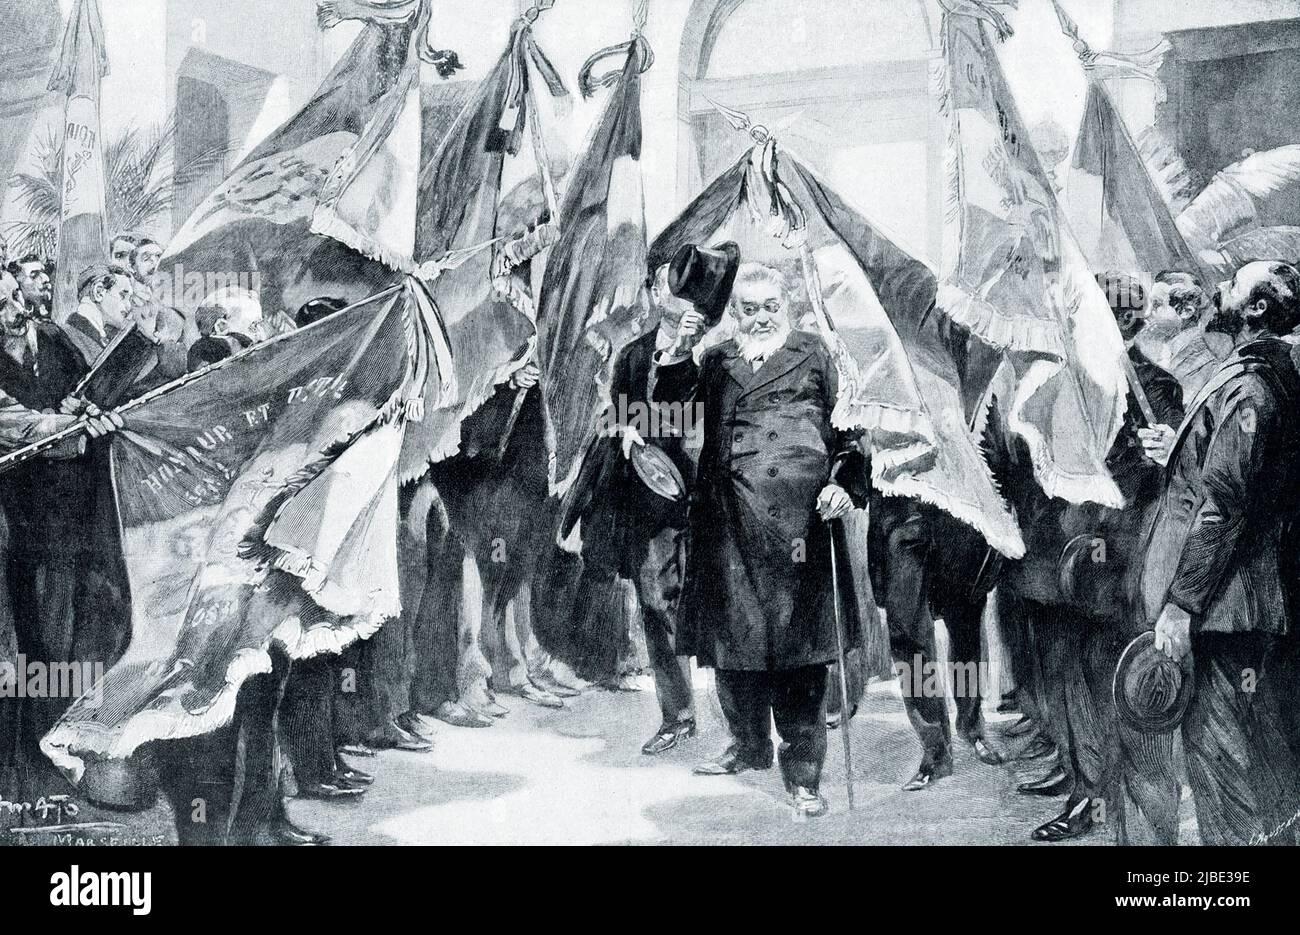 The 1906 caption reads: “PRESIDENT KRUGER'S RECEPTION AT MARSEILLES.—This picture brings us down to today and the Boers' brave struggle for freedom. France showed such sympathy for the Boers as to cause much hard feeling and some diplomatic difficulties between her and England. When the 'grand old man' of South Africa arrived, in France to beg for European aid, he was given an official reception there, and passed as you see him here along a whole avenue of French flags.”  Stephanus Johannes Paulus Kruger (or just Paul Kruger) (1825–1904) was the president of the South African Republic (sometim Stock Photo